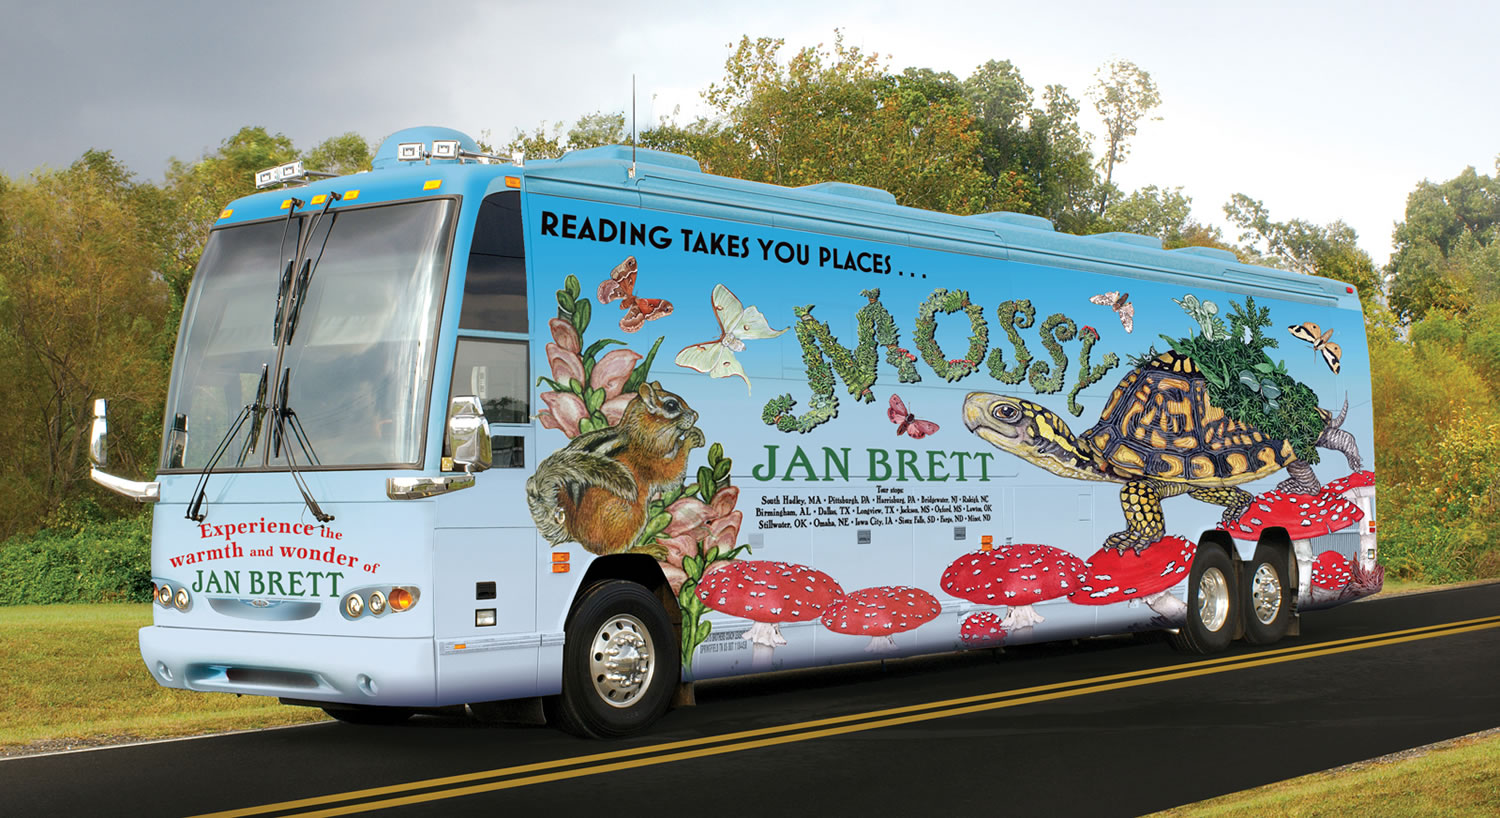 Author Jan Brett will roll into Vancouver this weekend in her &quot;Mossy&quot; tour bus.